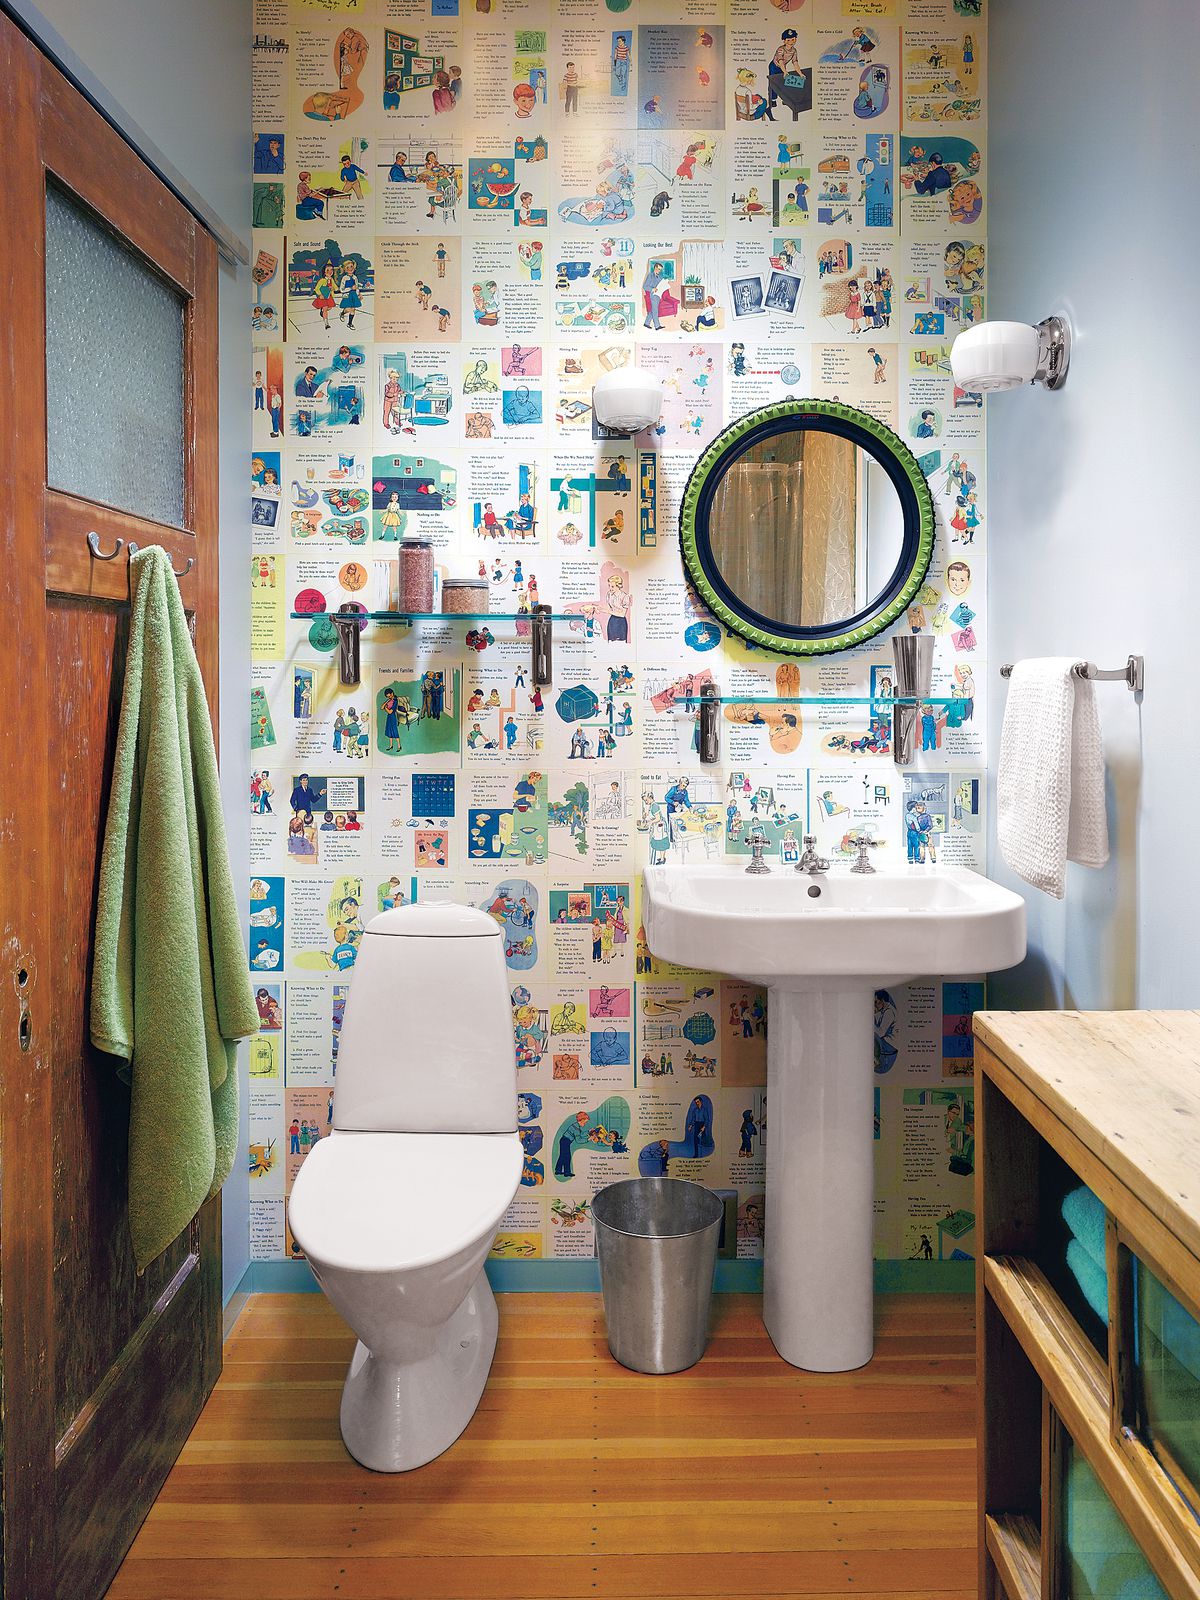 18 Bathroom Decorating Ideas on a Budget   This Old House